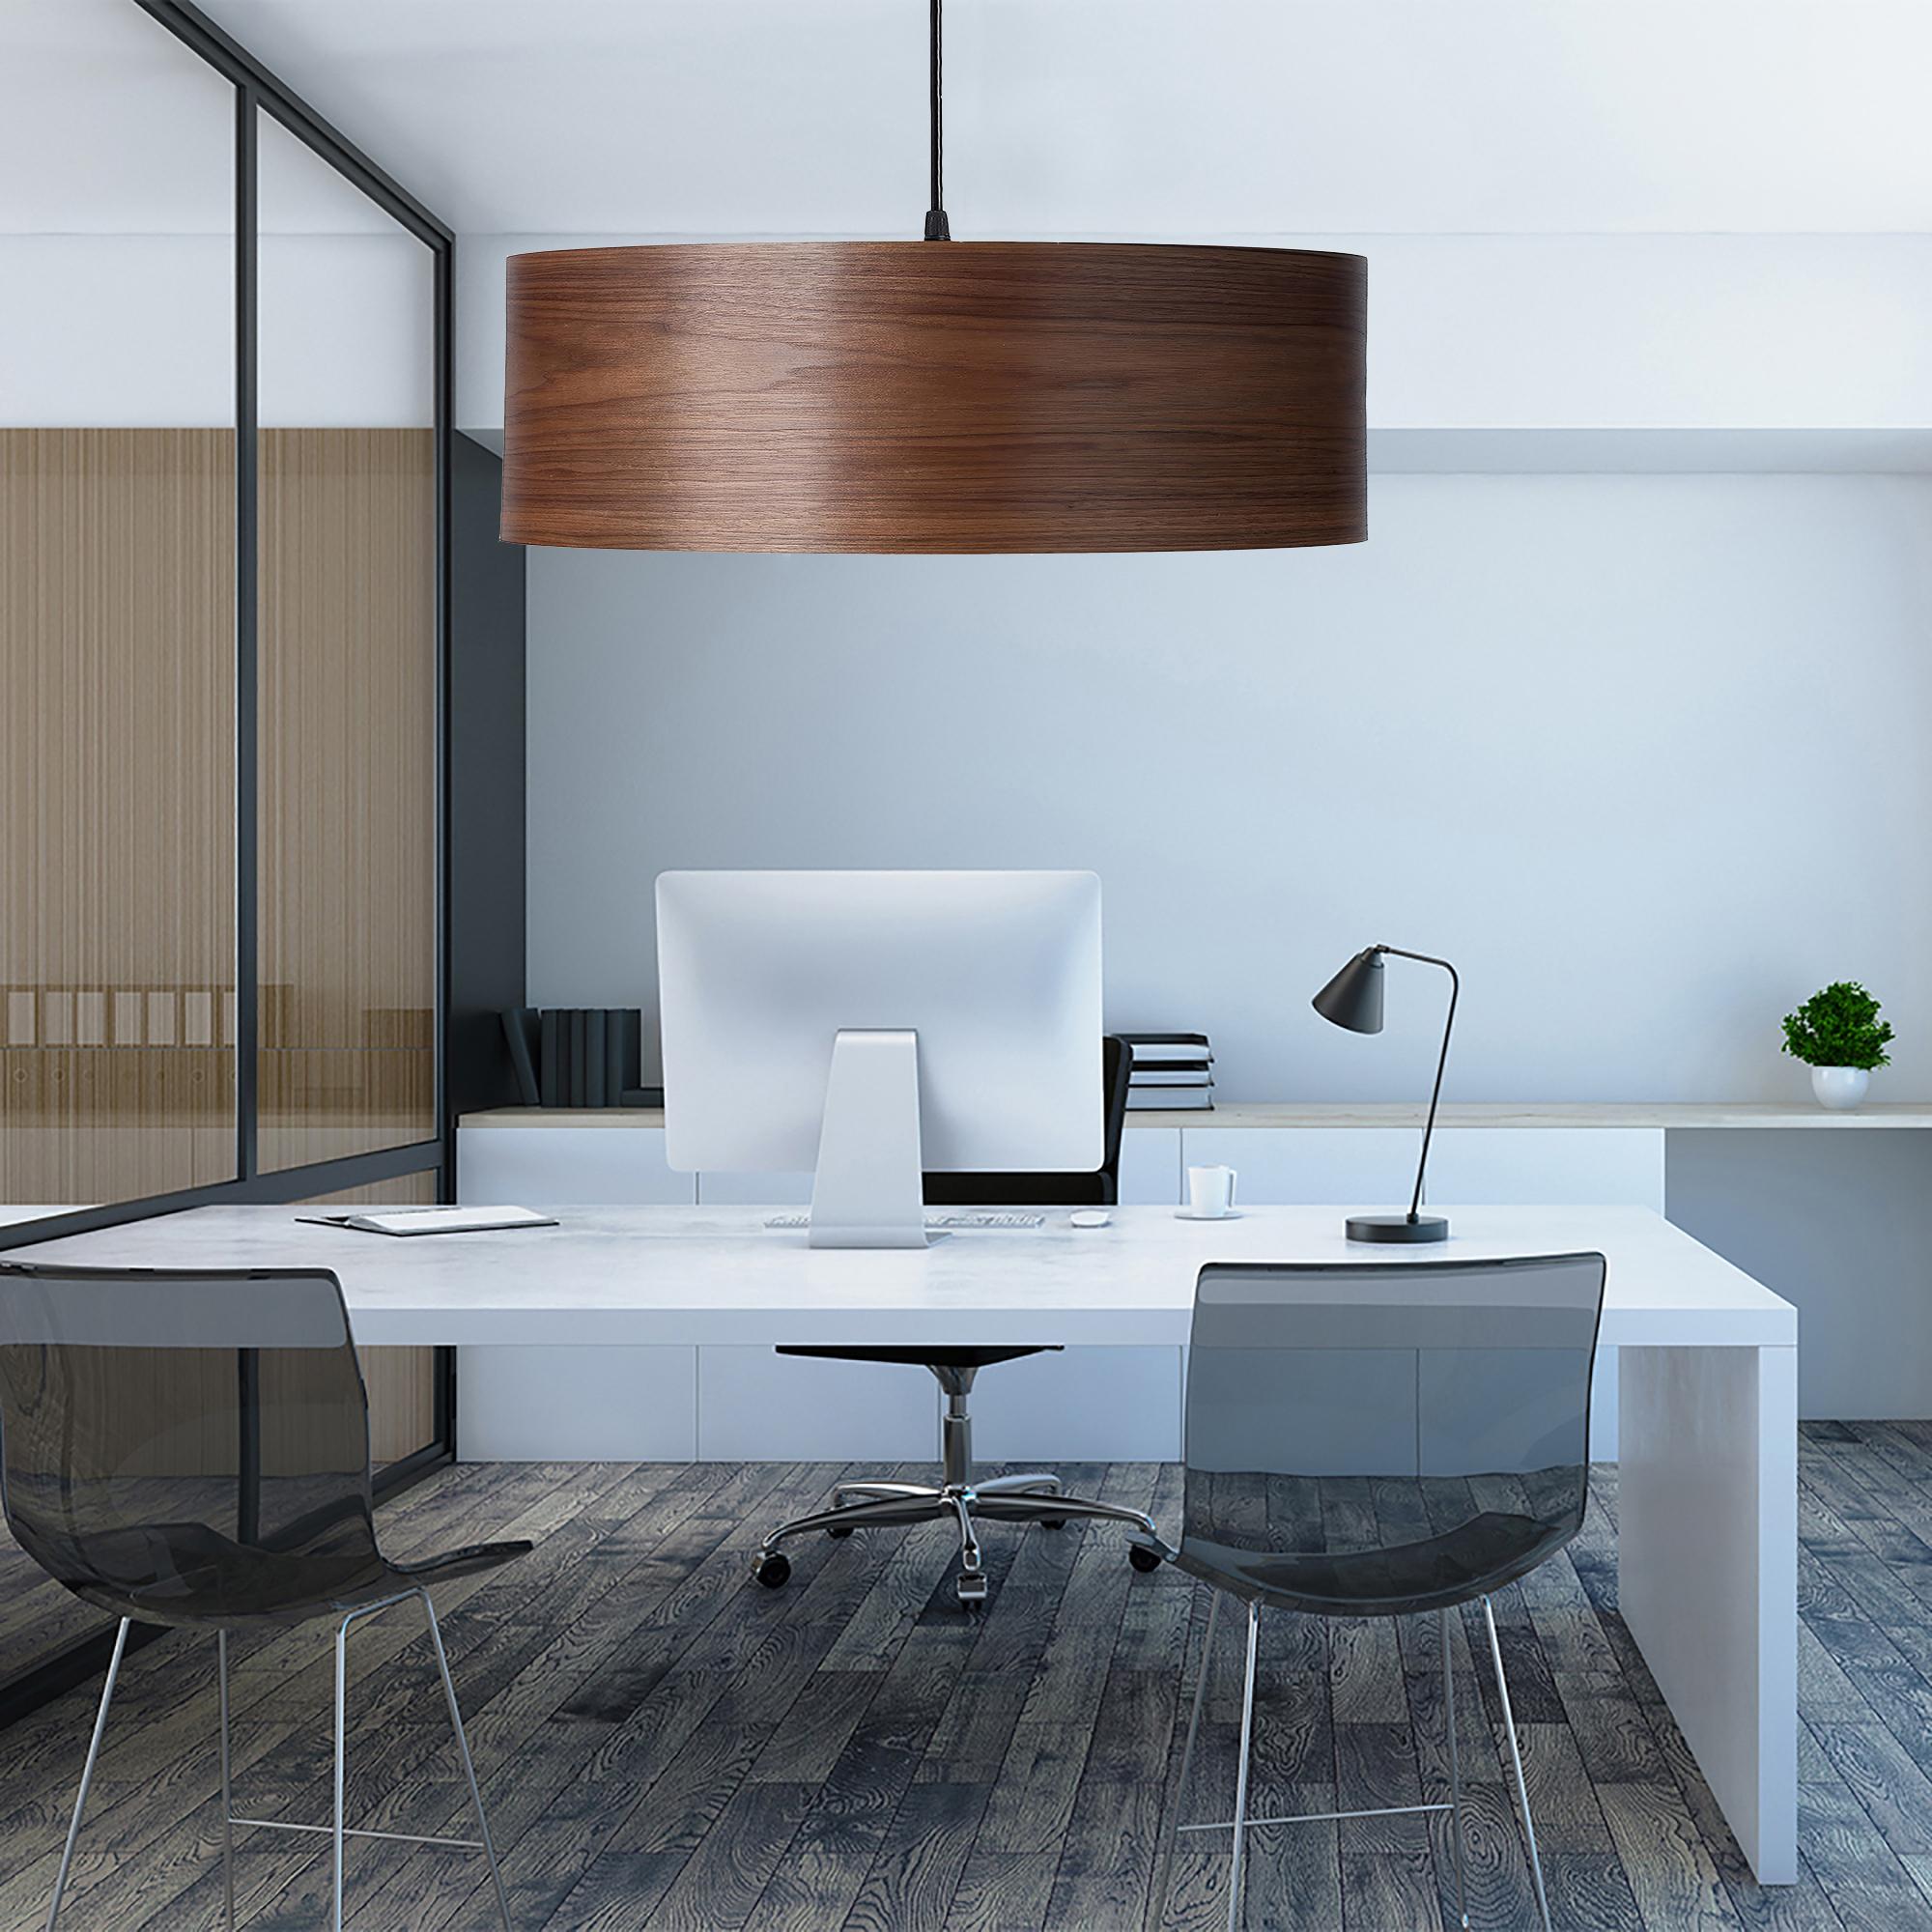 ARA is a contemporary, Mid-Century Modern light fixture. This is a minimalist luxury drum pendant design and can be exhibited in bedrooms, offices, dining nooks, and restaurants. Walnut is prized by designers for its glorious tight grain pattern. We